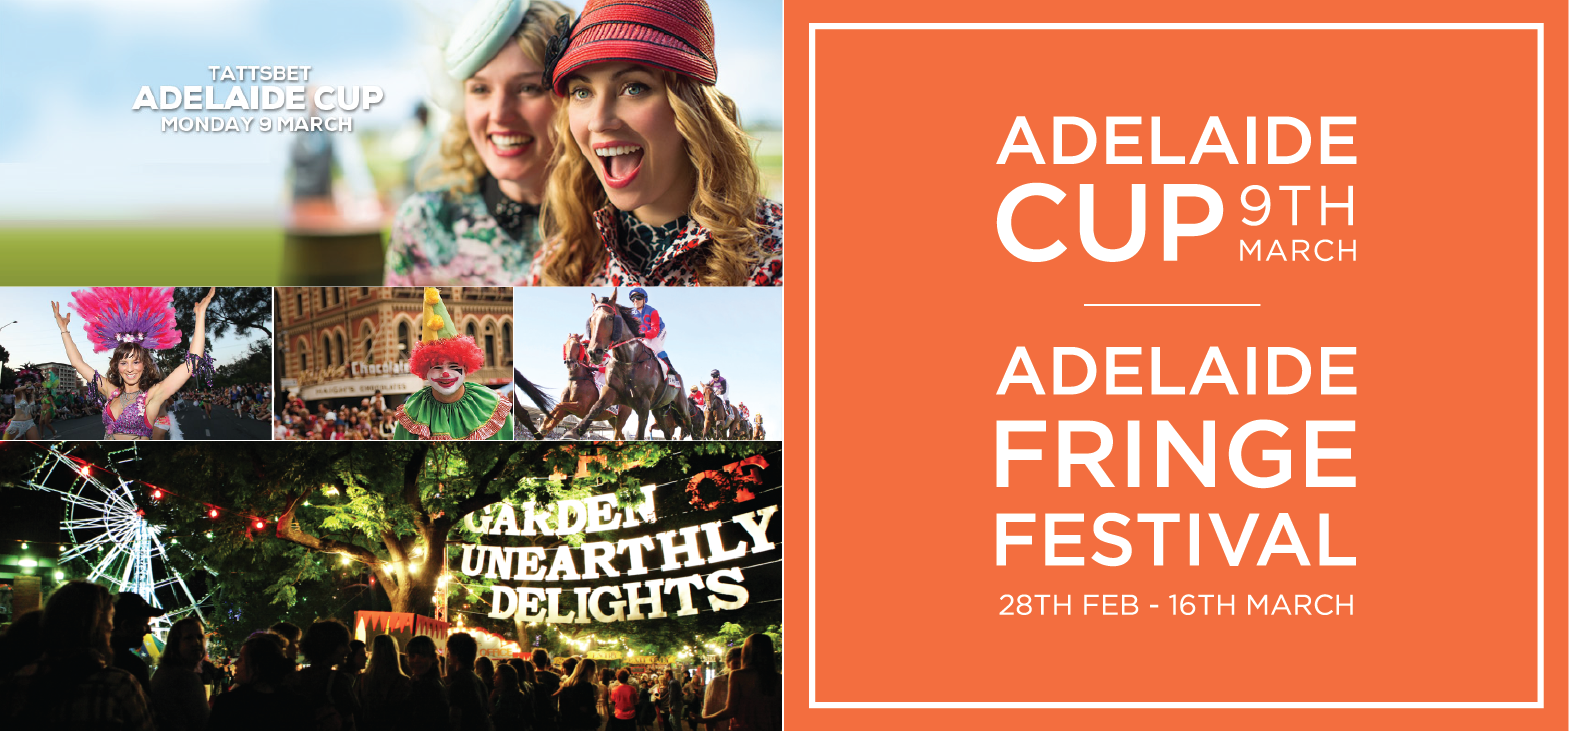 Adelaide Cup and Adelaide Fringe Festival